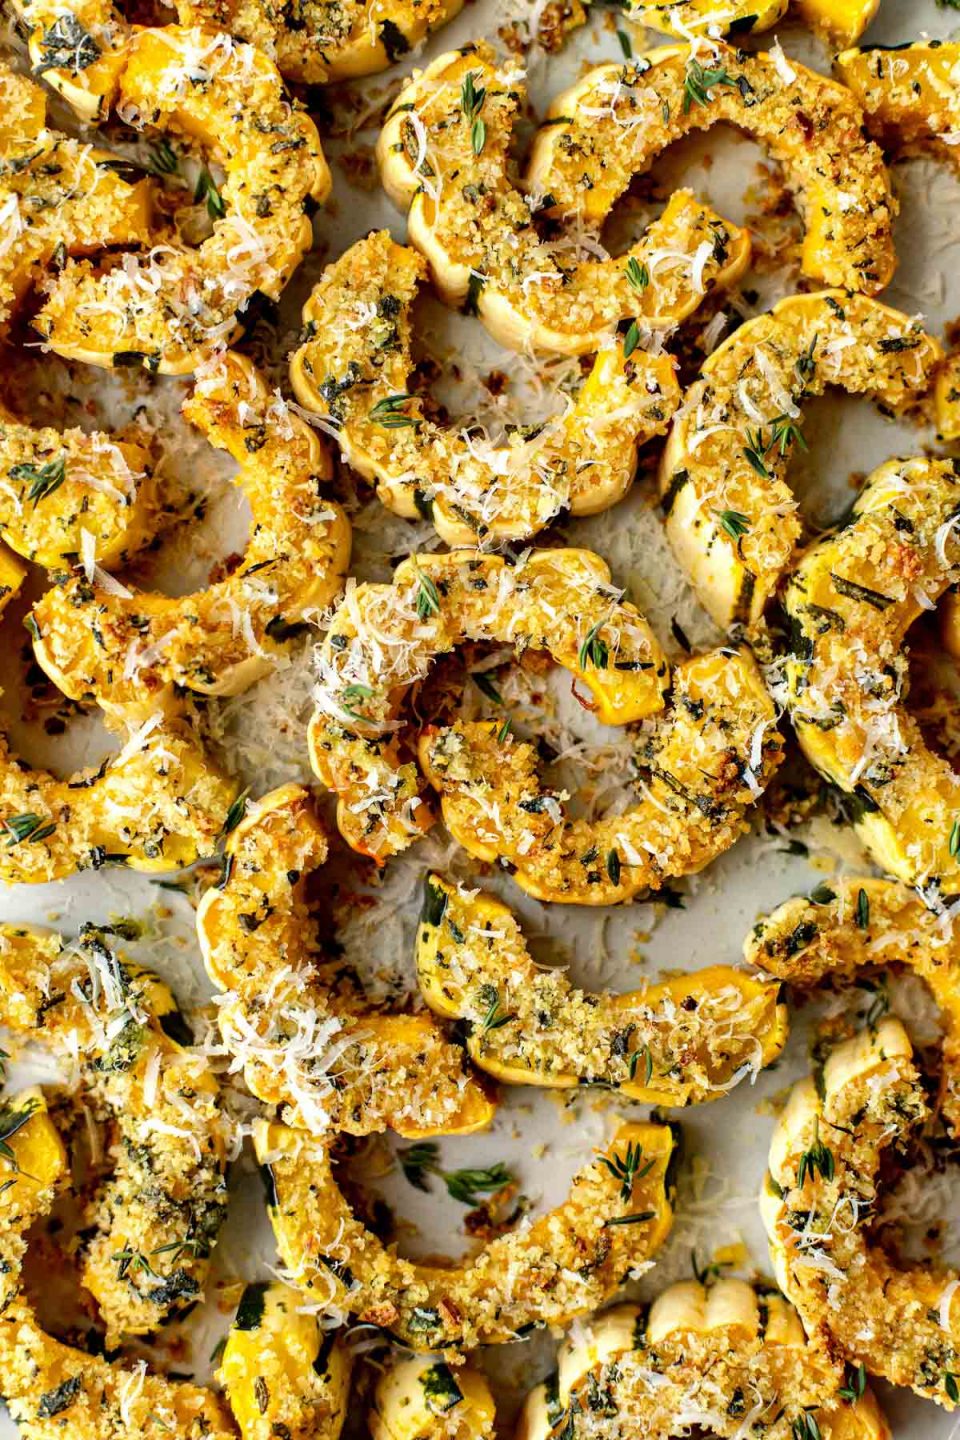 A close up shot of Parmesan Crusted Roasted Delicata Squash arranged on a creamy white serving platter. The squash has been garnished with freshly grated parmesan and fresh thyme.